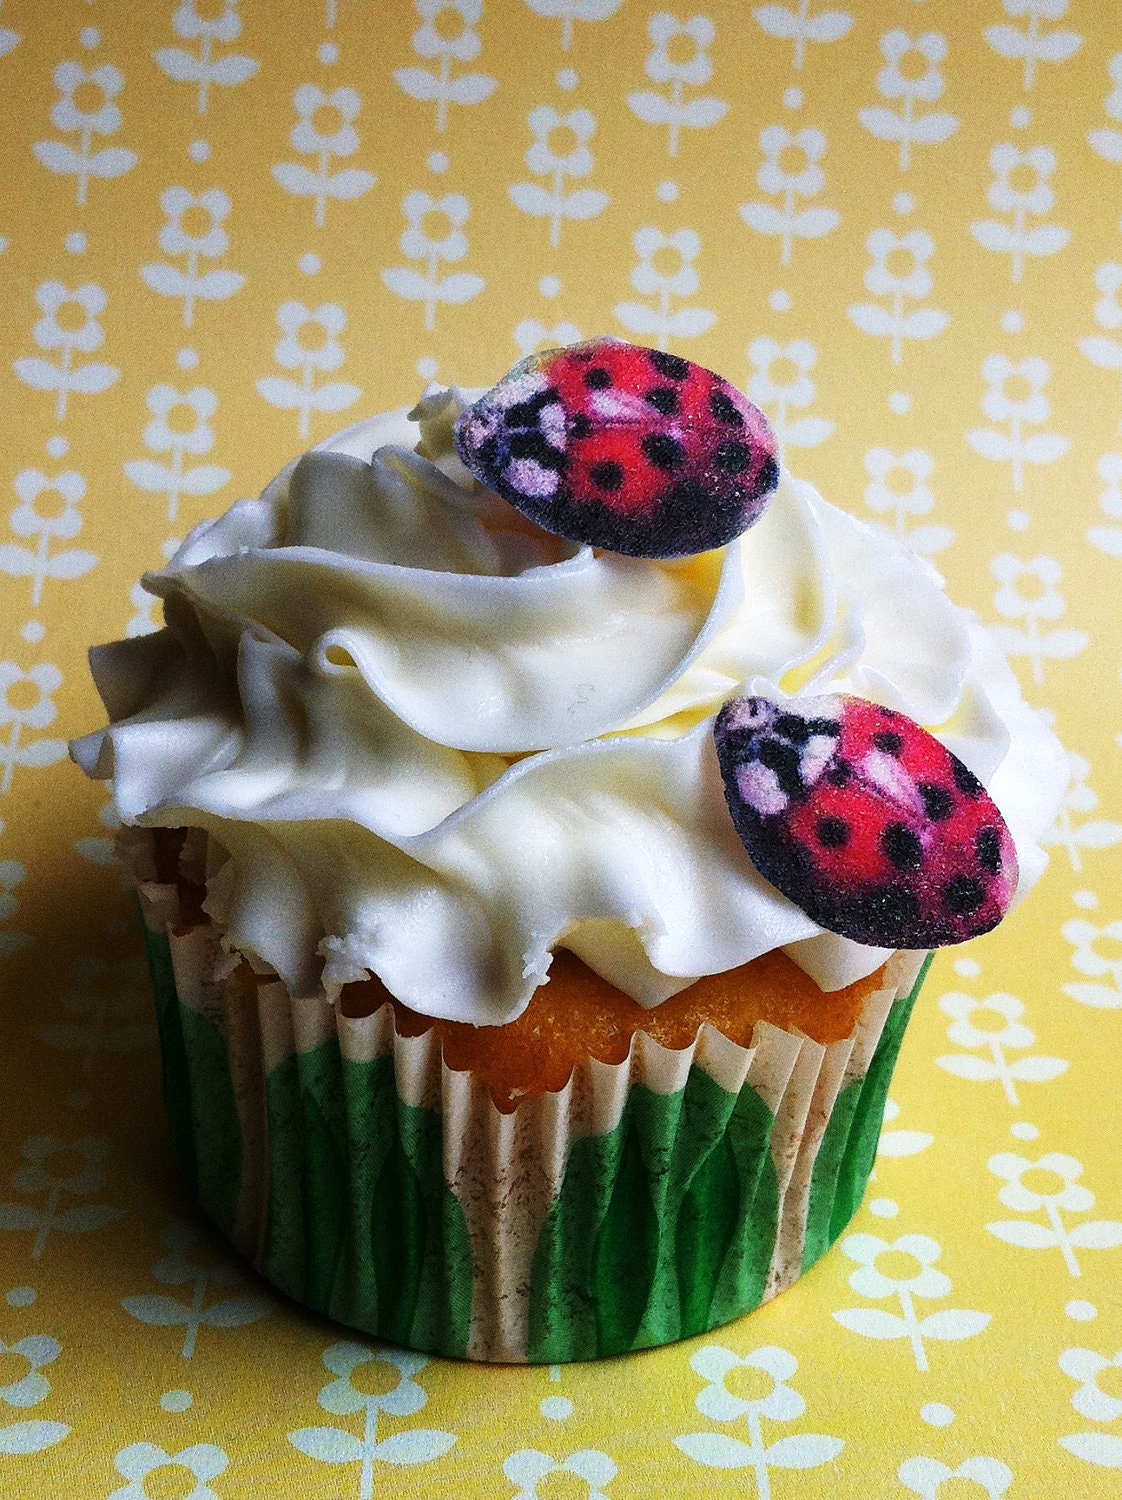 Edible Lady Bugs - Cake & Cupcake toppers - Food Accessories - SugarRobot